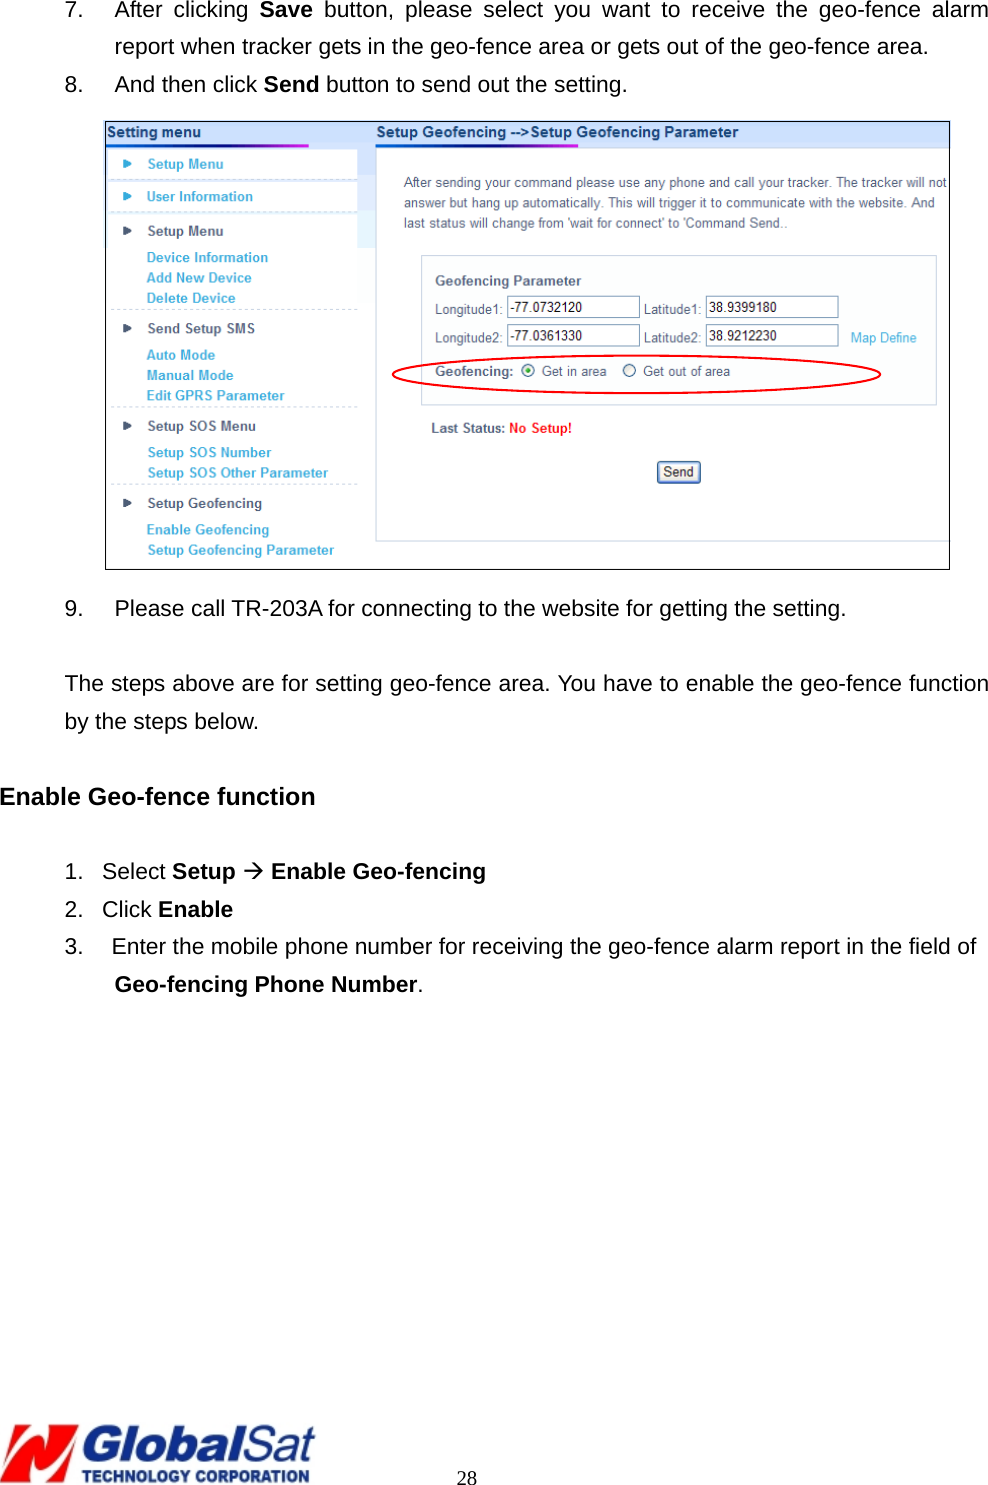                                                                                     28 7. After clicking Save button, please select you want to receive the geo-fence alarm report when tracker gets in the geo-fence area or gets out of the geo-fence area. 8.  And then click Send button to send out the setting.  9.  Please call TR-203A for connecting to the website for getting the setting.  The steps above are for setting geo-fence area. You have to enable the geo-fence function by the steps below.  Enable Geo-fence function        1. Select Setup Æ Enable Geo-fencing 2. Click Enable 3.  Enter the mobile phone number for receiving the geo-fence alarm report in the field of Geo-fencing Phone Number.  